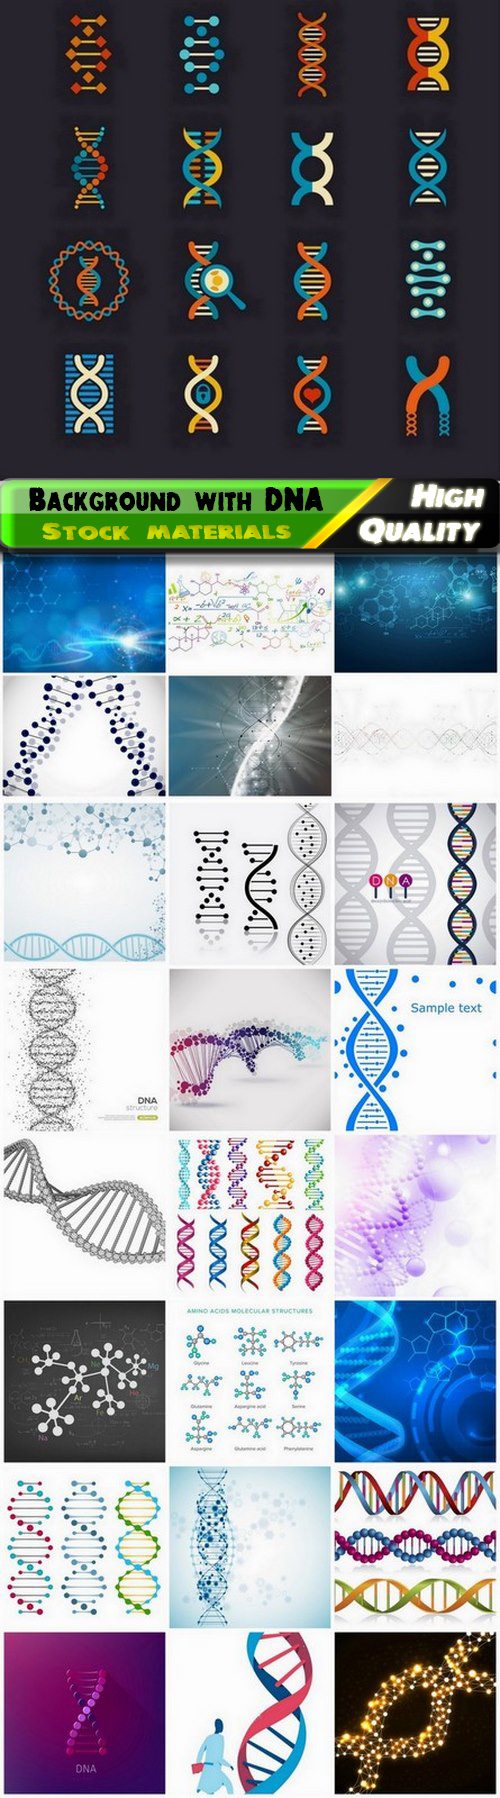 Scientific medical background with DNA 25 Eps